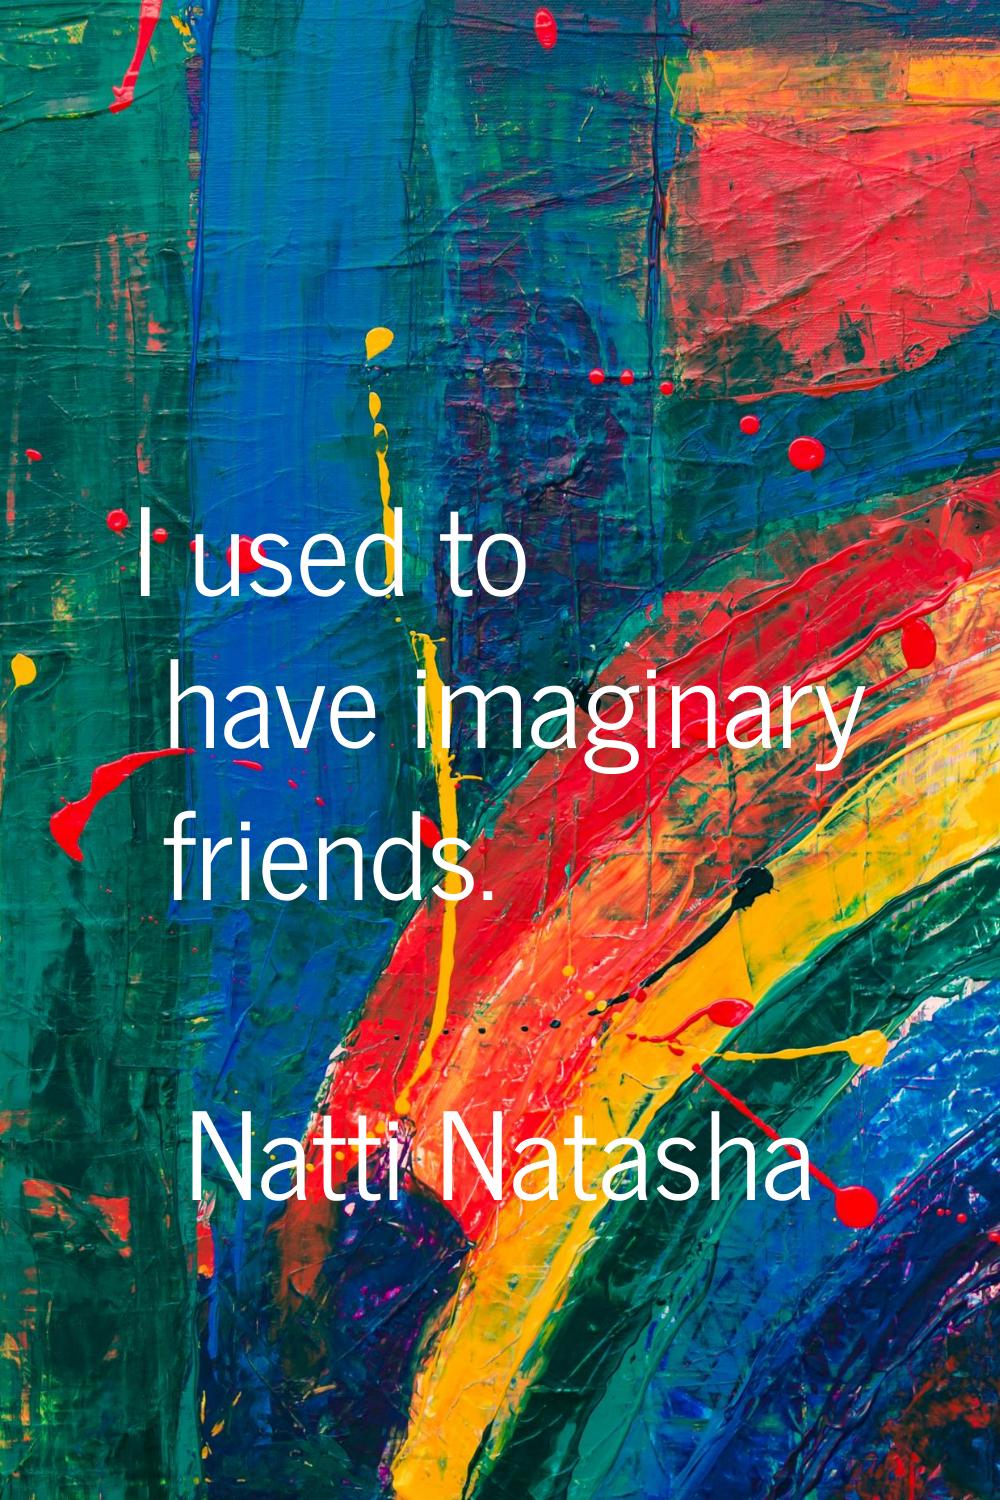 I used to have imaginary friends.